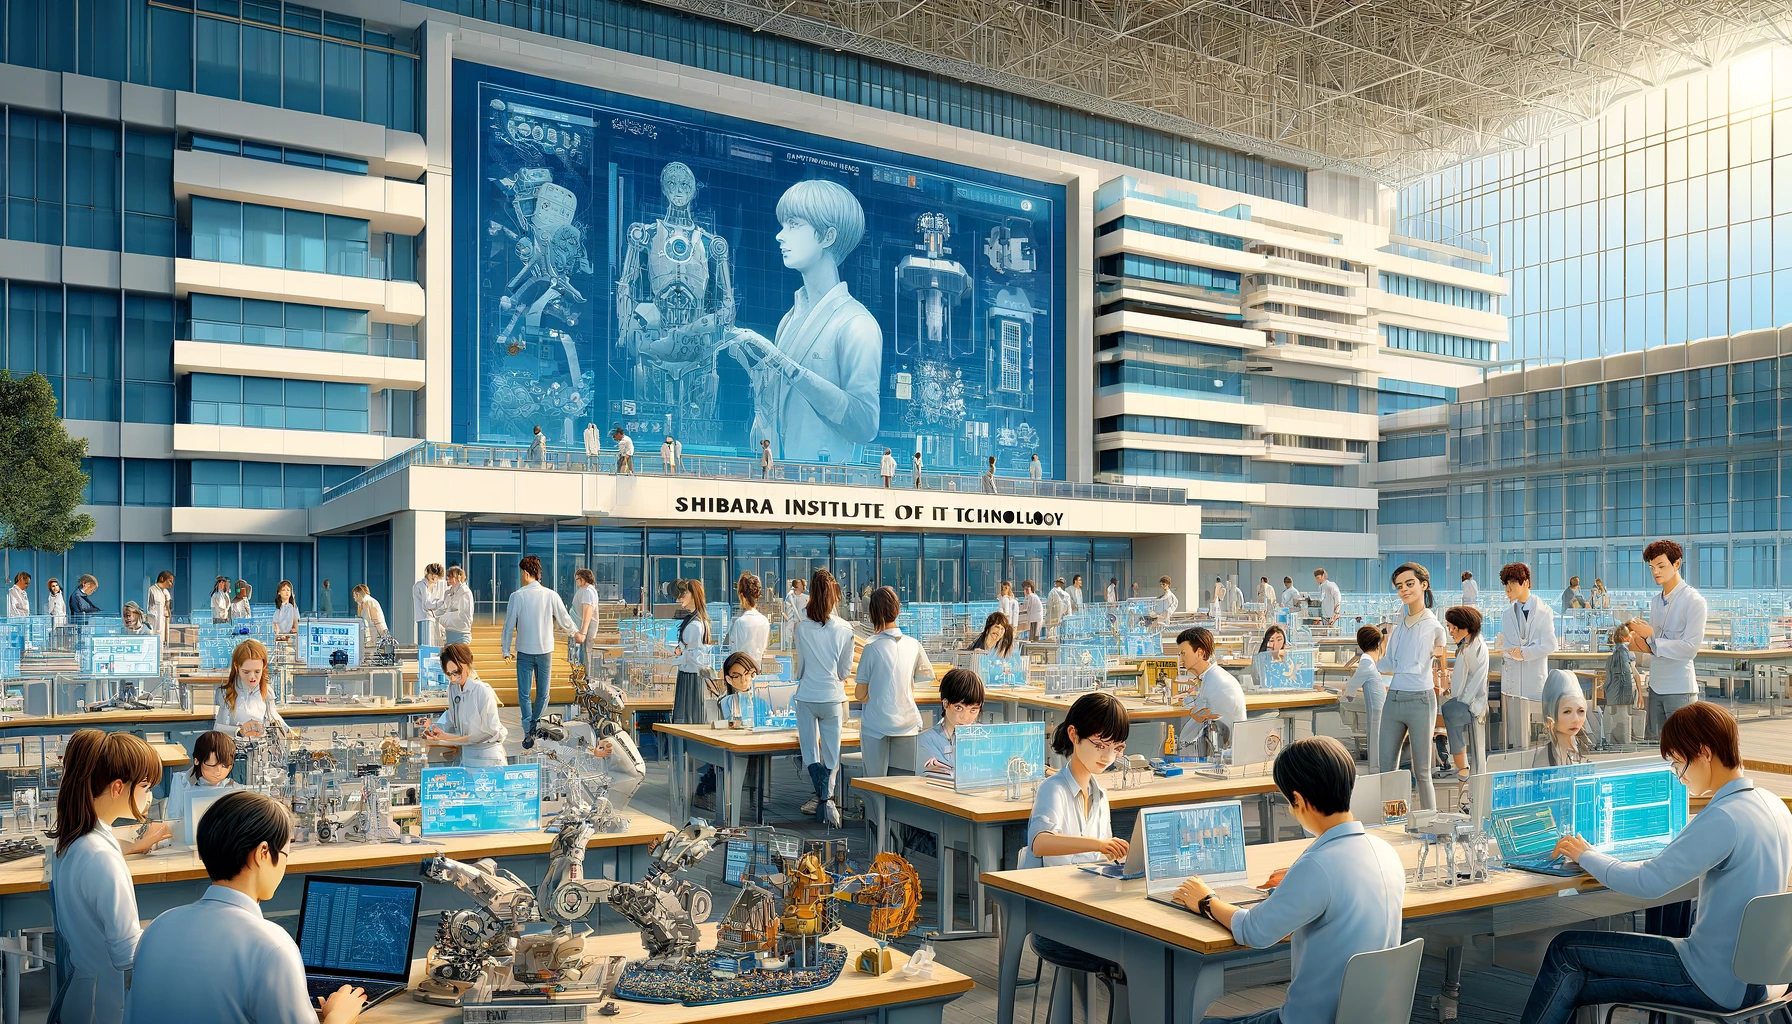 An inspiring campus scene at Shibaura Institute of Technology in Japan, showcasing why it is popular, with the word 'Shibaura' prominently and largely displayed in English. The image features students of various Asian descents engaged in advanced engineering and technological activities. Students are seen working on robotics, programming in computer labs, and conducting scientific experiments in state-of-the-art facilities. The campus includes modern buildings with sleek designs and high-tech environments. Some students collaborate on projects while others present their innovative ideas to peers. The atmosphere is dynamic and future-focused, illustrating a hub of innovation and learning with the university's name visibly included in the scene.